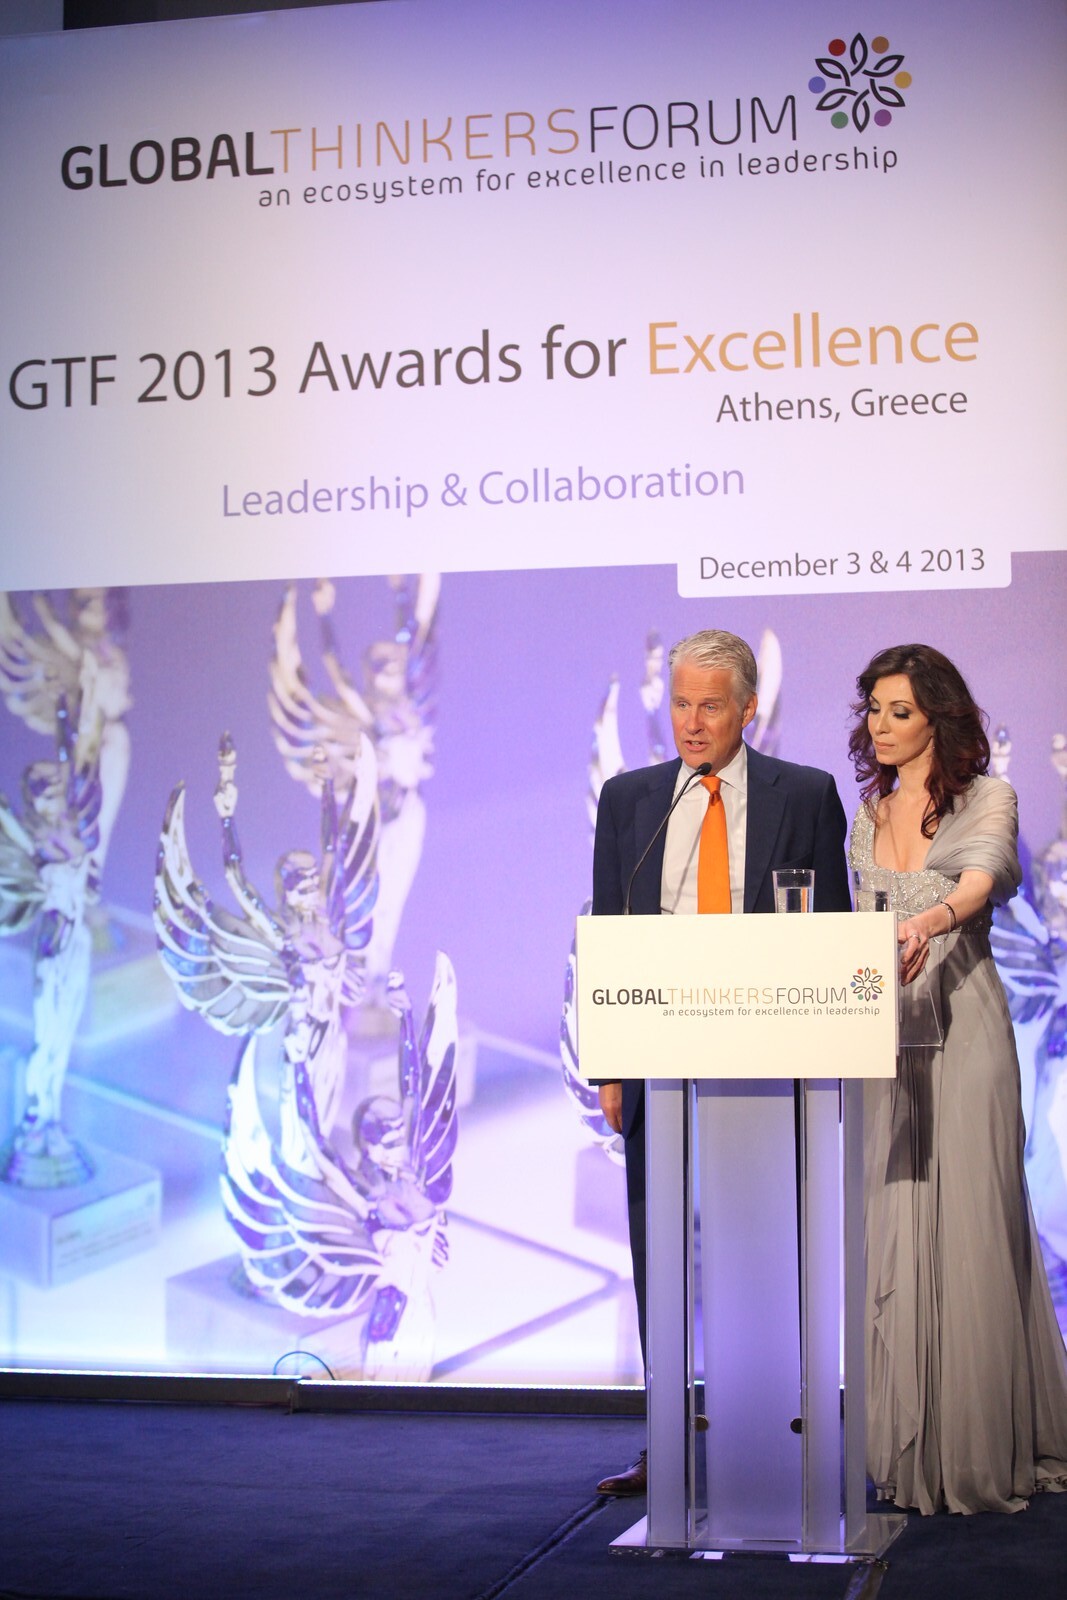 Stephen Cole, Elizabeth Filippouli announcing the GTF 2013 Award for Excellence in Positive Change